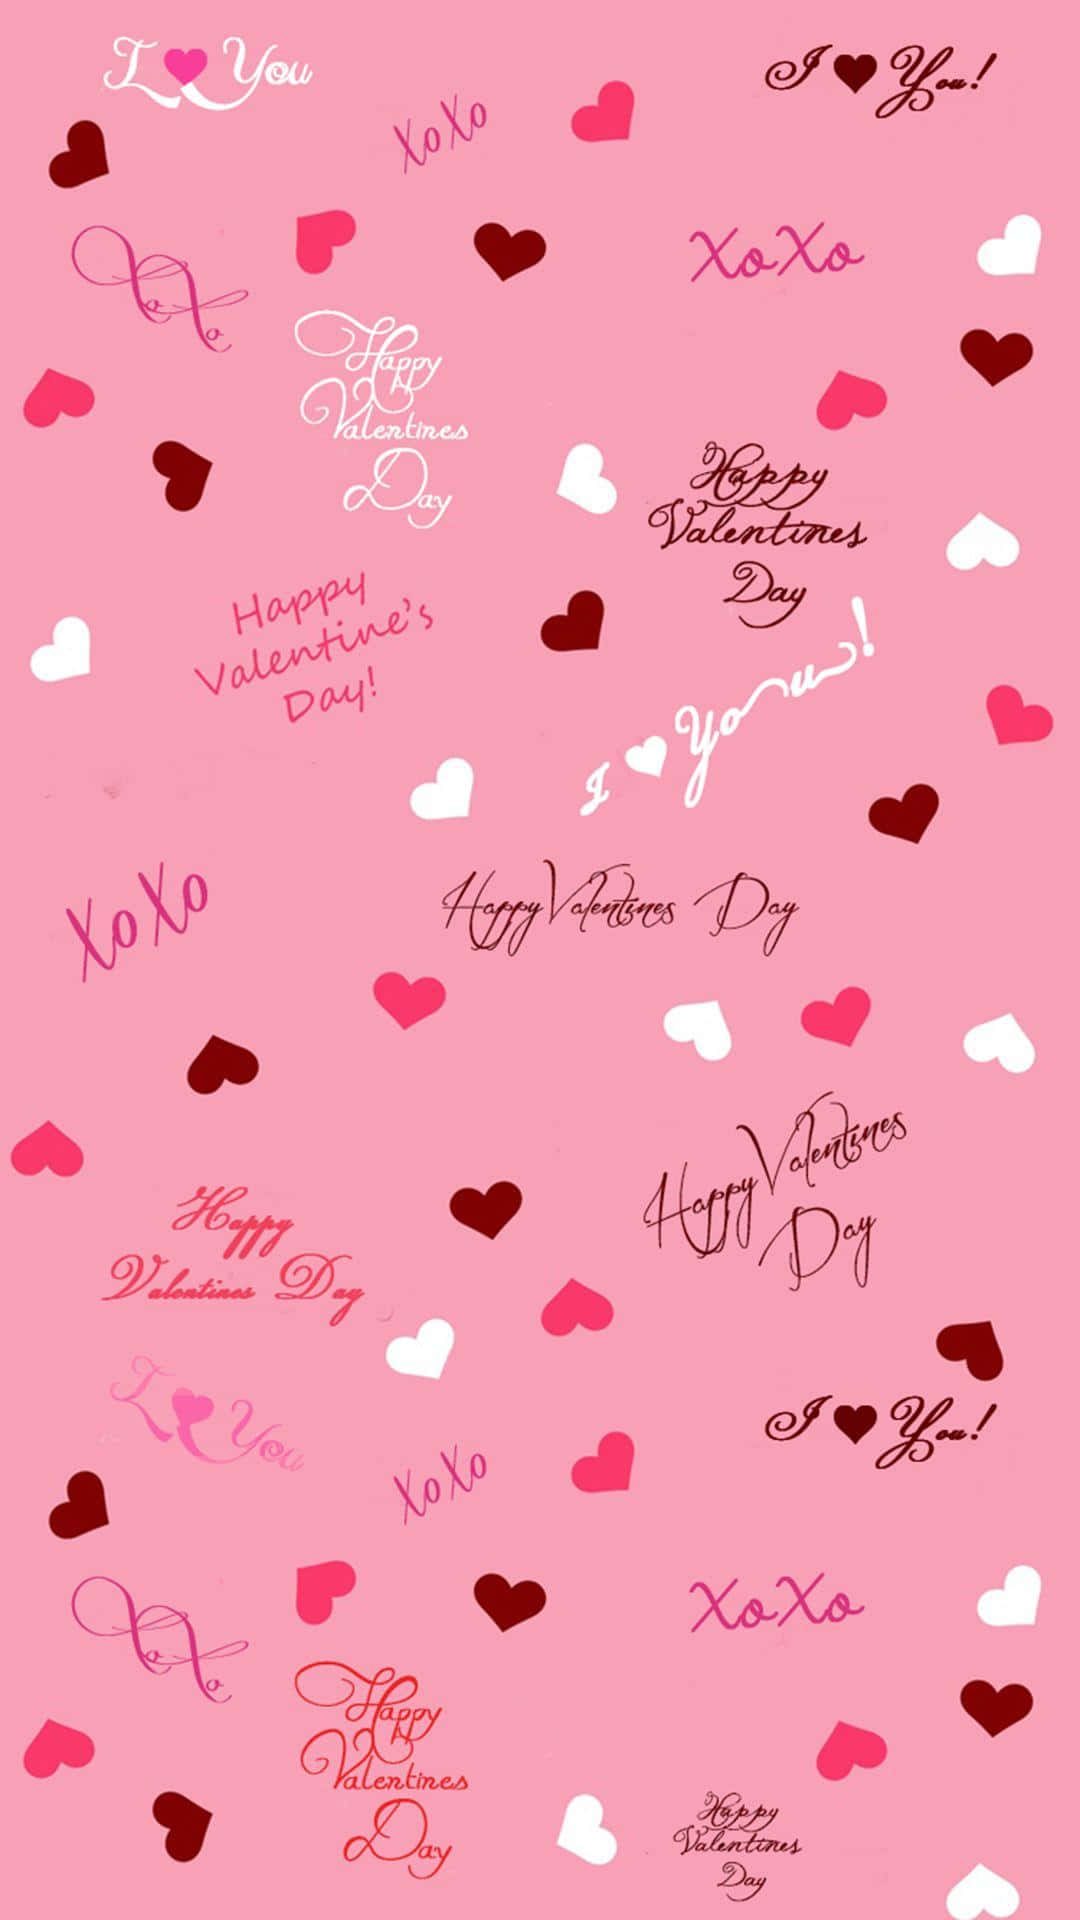 Valentine's Day Wallpaper With Hearts And Words